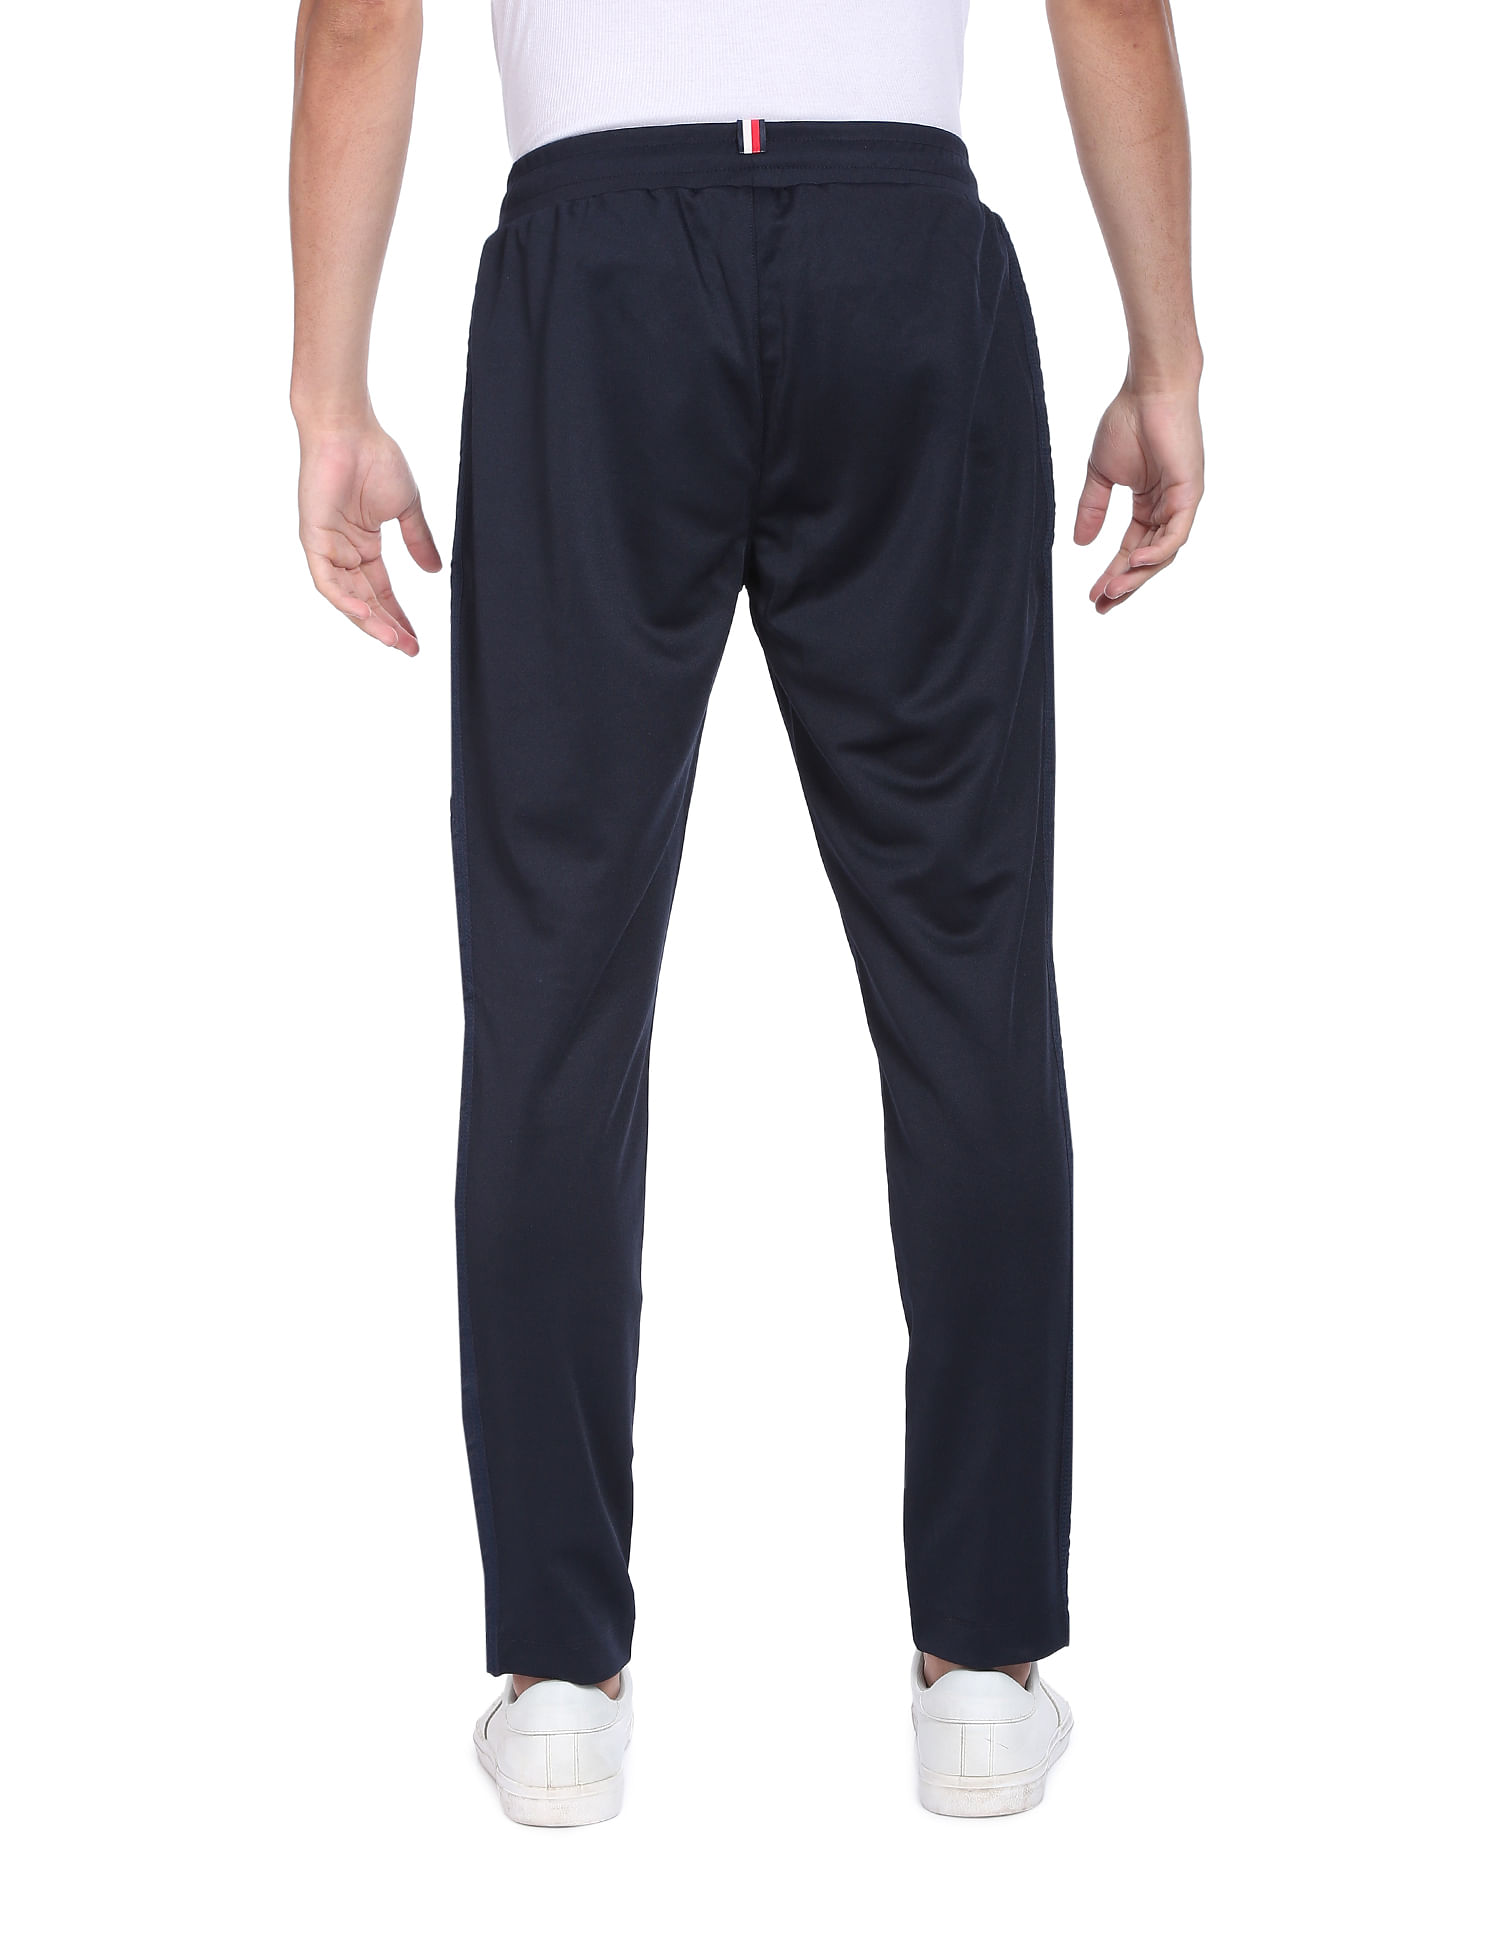 WoW Performance Sweat Pants AKLM683-2 | Shop online now at Sunlight Station